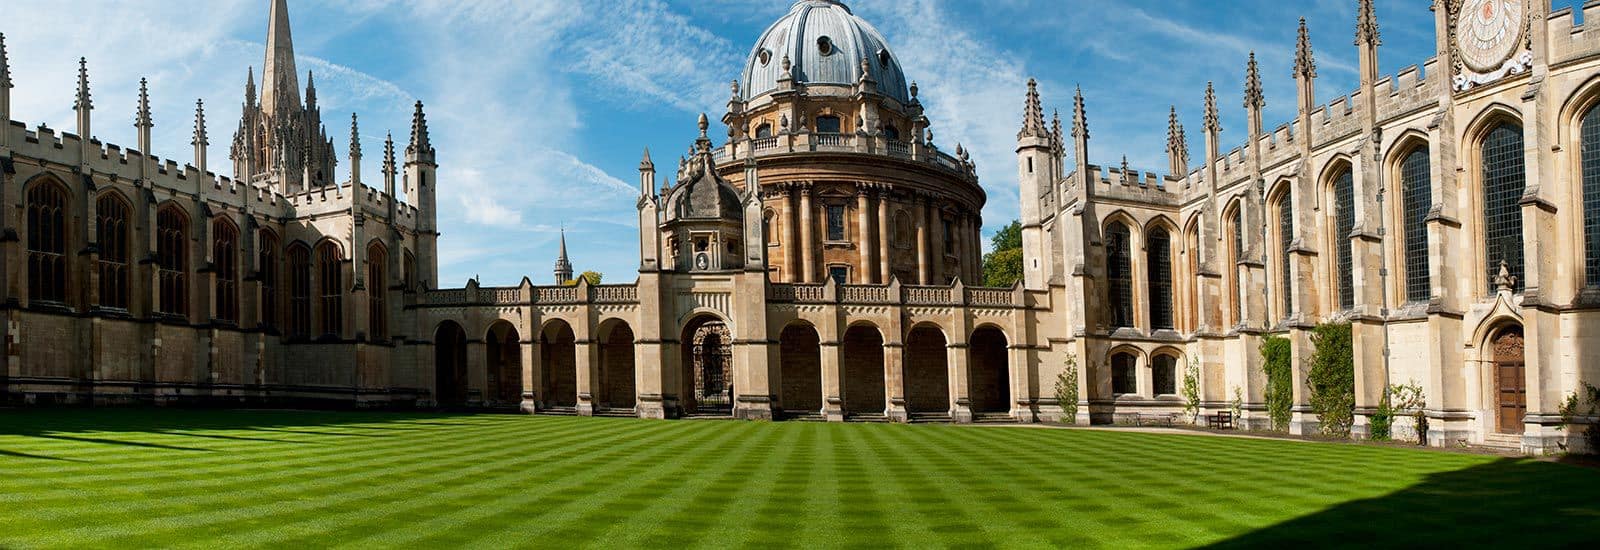 Jacopo from Italy and his experience with Super Intensive IELTS course at Kings  Oxford